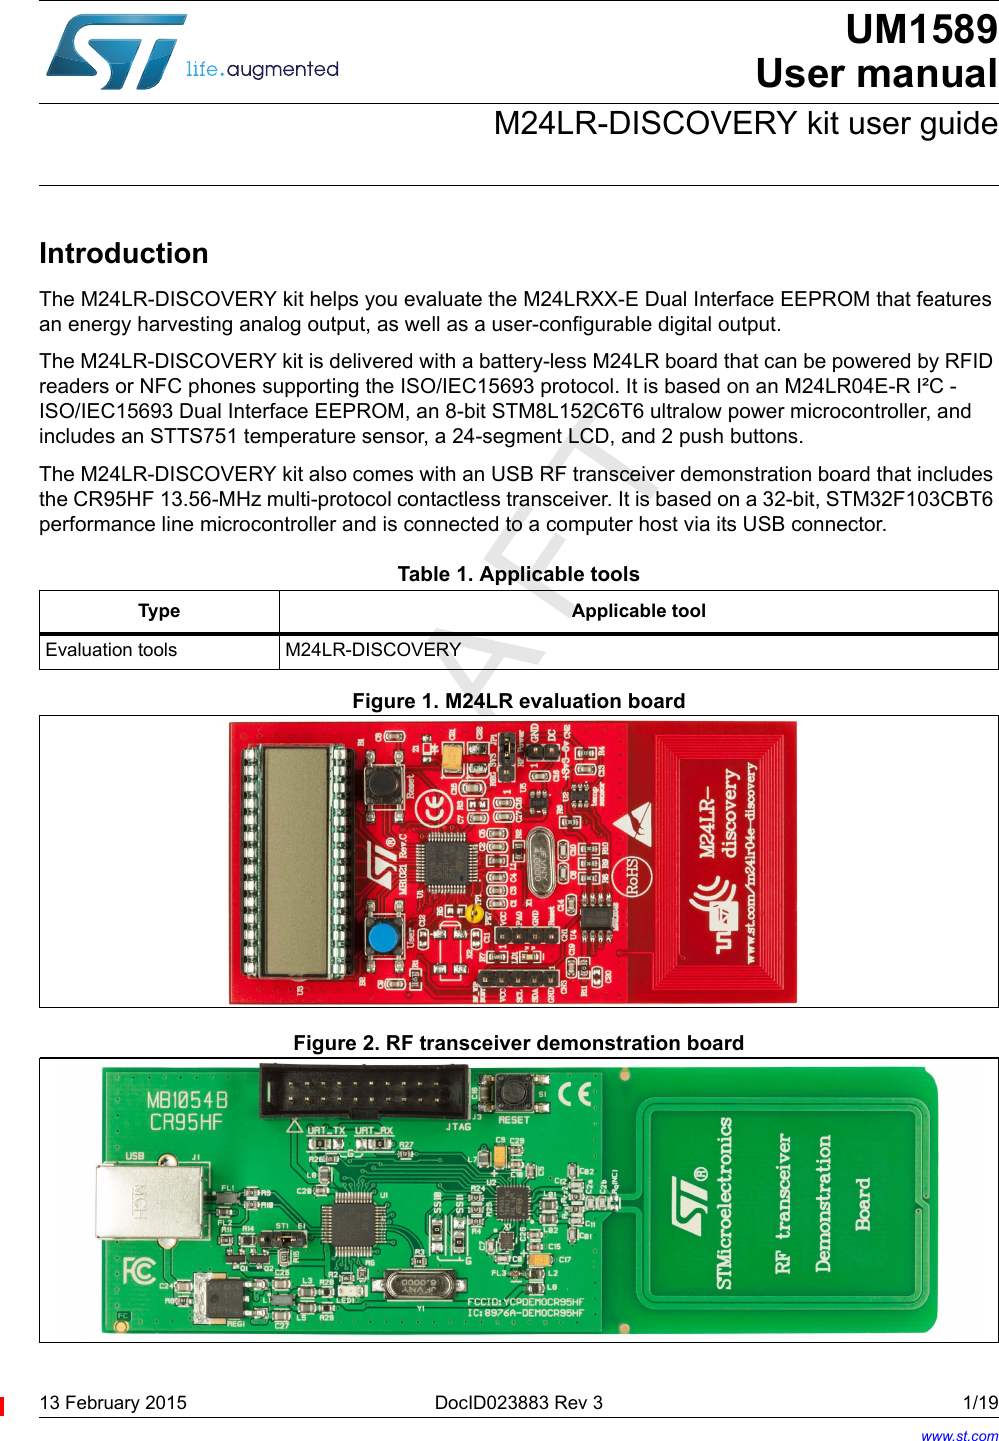 13 February 2015 DocID023883 Rev 3 1/19UM1589User manualM24LR-DISCOVERY kit user guideIntroductionThe M24LR-DISCOVERY kit helps you evaluate the M24LRXX-E Dual Interface EEPROM that features an energy harvesting analog output, as well as a user-configurable digital output.The M24LR-DISCOVERY kit is delivered with a battery-less M24LR board that can be powered by RFID readers or NFC phones supporting the ISO/IEC15693 protocol. It is based on an M24LR04E-R I²C -ISO/IEC15693 Dual Interface EEPROM, an 8-bit STM8L152C6T6 ultralow power microcontroller, and includes an STTS751 temperature sensor, a 24-segment LCD, and 2 push buttons.The M24LR-DISCOVERY kit also comes with an USB RF transceiver demonstration board that includes the CR95HF 13.56-MHz multi-protocol contactless transceiver. It is based on a 32-bit, STM32F103CBT6 performance line microcontroller and is connected to a computer host via its USB connector.         Figure 1. M24LR evaluation boardFigure 2. RF transceiver demonstration board Table 1. Applicable toolsType Applicable toolEvaluation tools M24LR-DISCOVERYwww.st.com